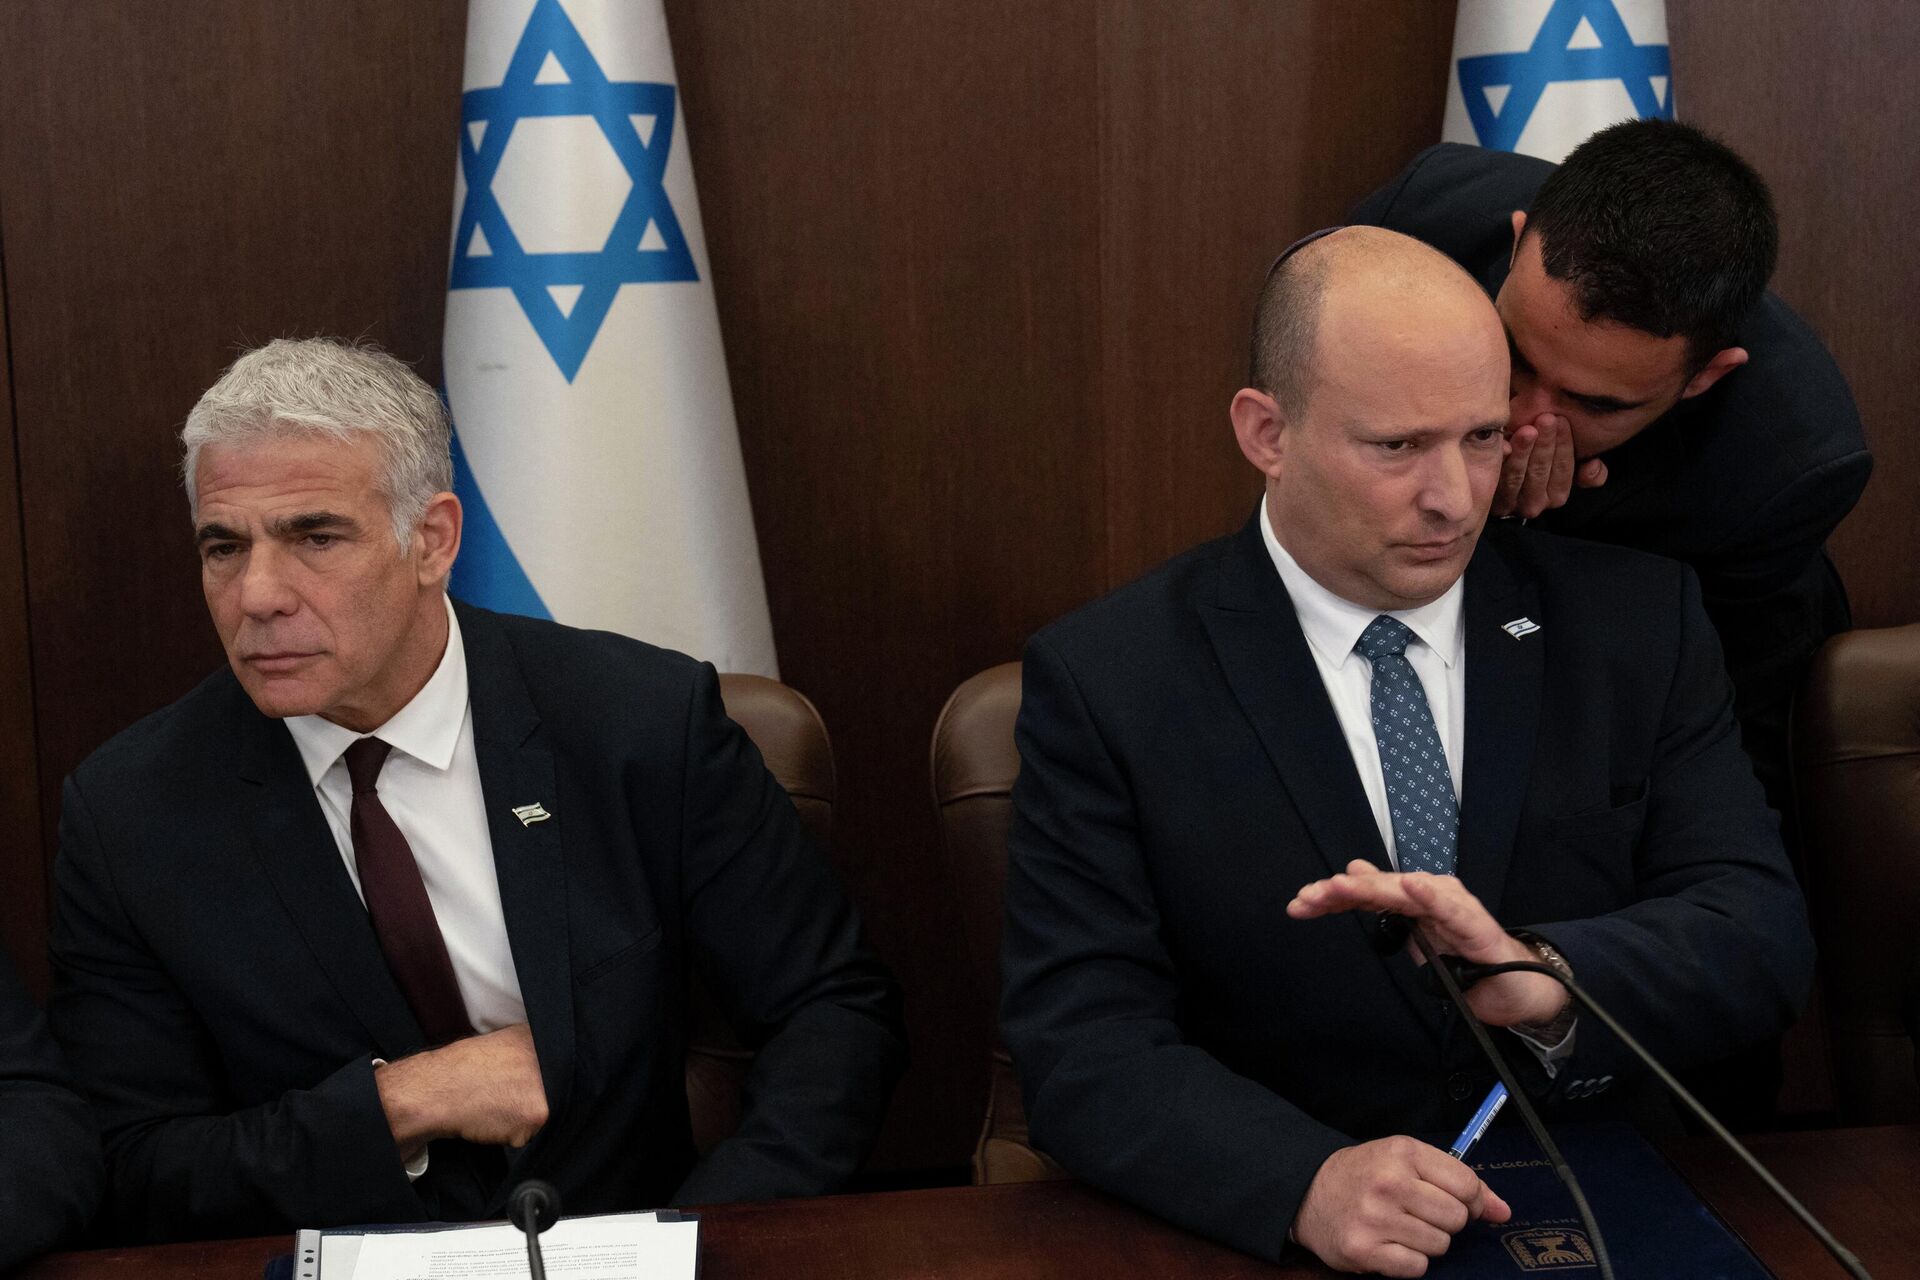 Israeli Prime Minister Naftali Bennett (R) listens to an aide as Foreign Minister Yair Lapid looks on during the weekly cabinet meeting in Jerusalem, on May 8, 2022 - Sputnik International, 1920, 01.07.2022